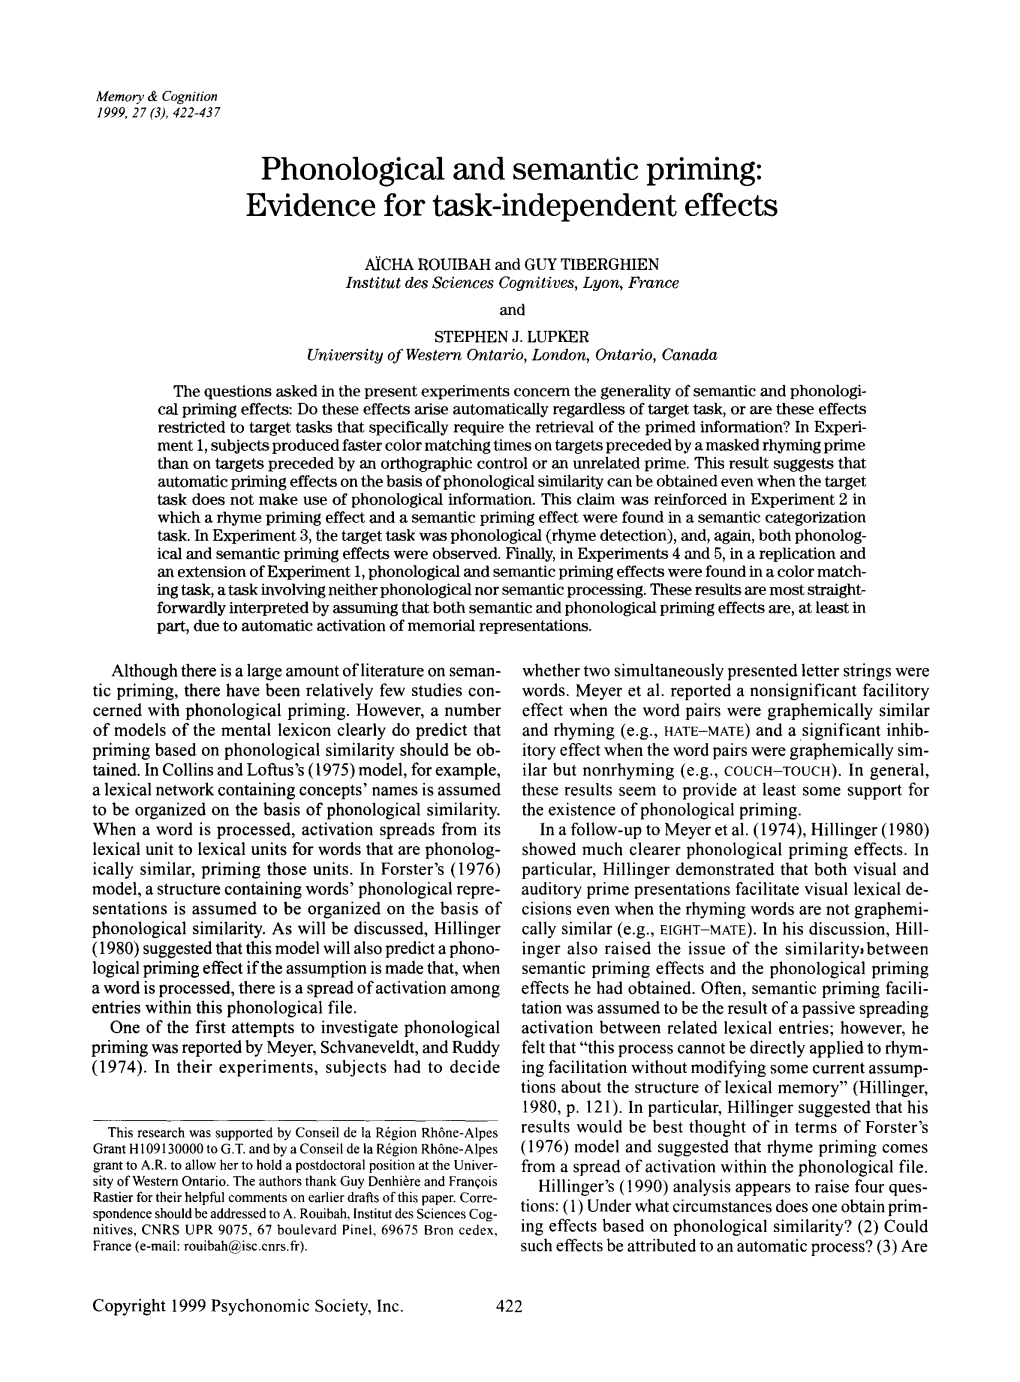 Phonological and Semantic Priming: Evidence for Task-Independent Effects